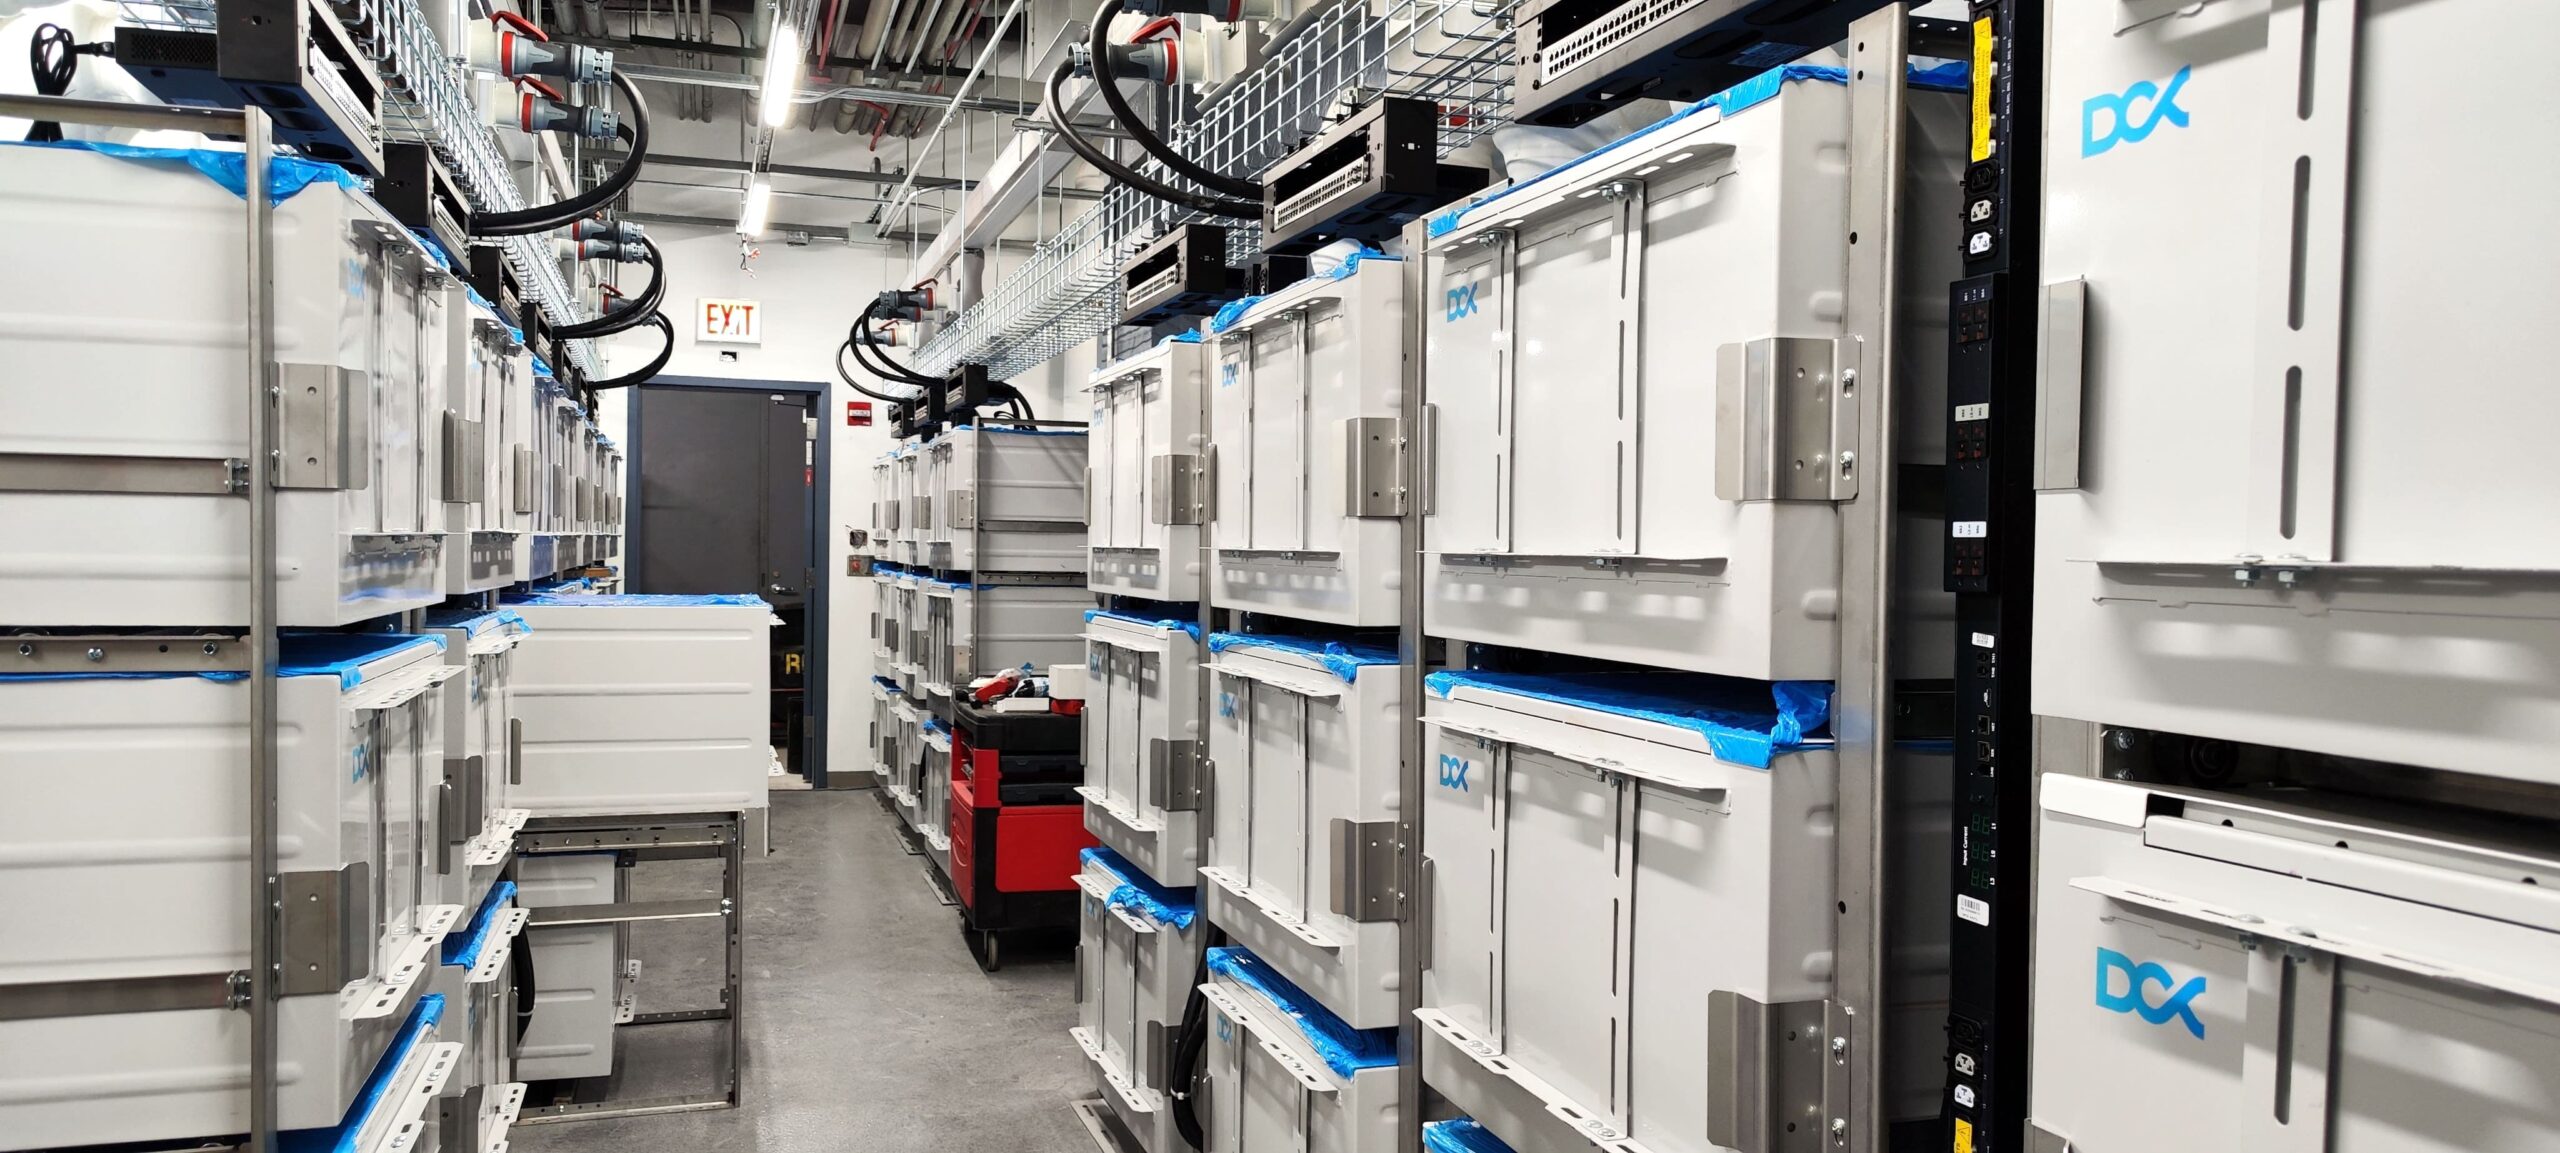 Keeping it Cool: Liquid Cooling Options for High-Density Data Centers